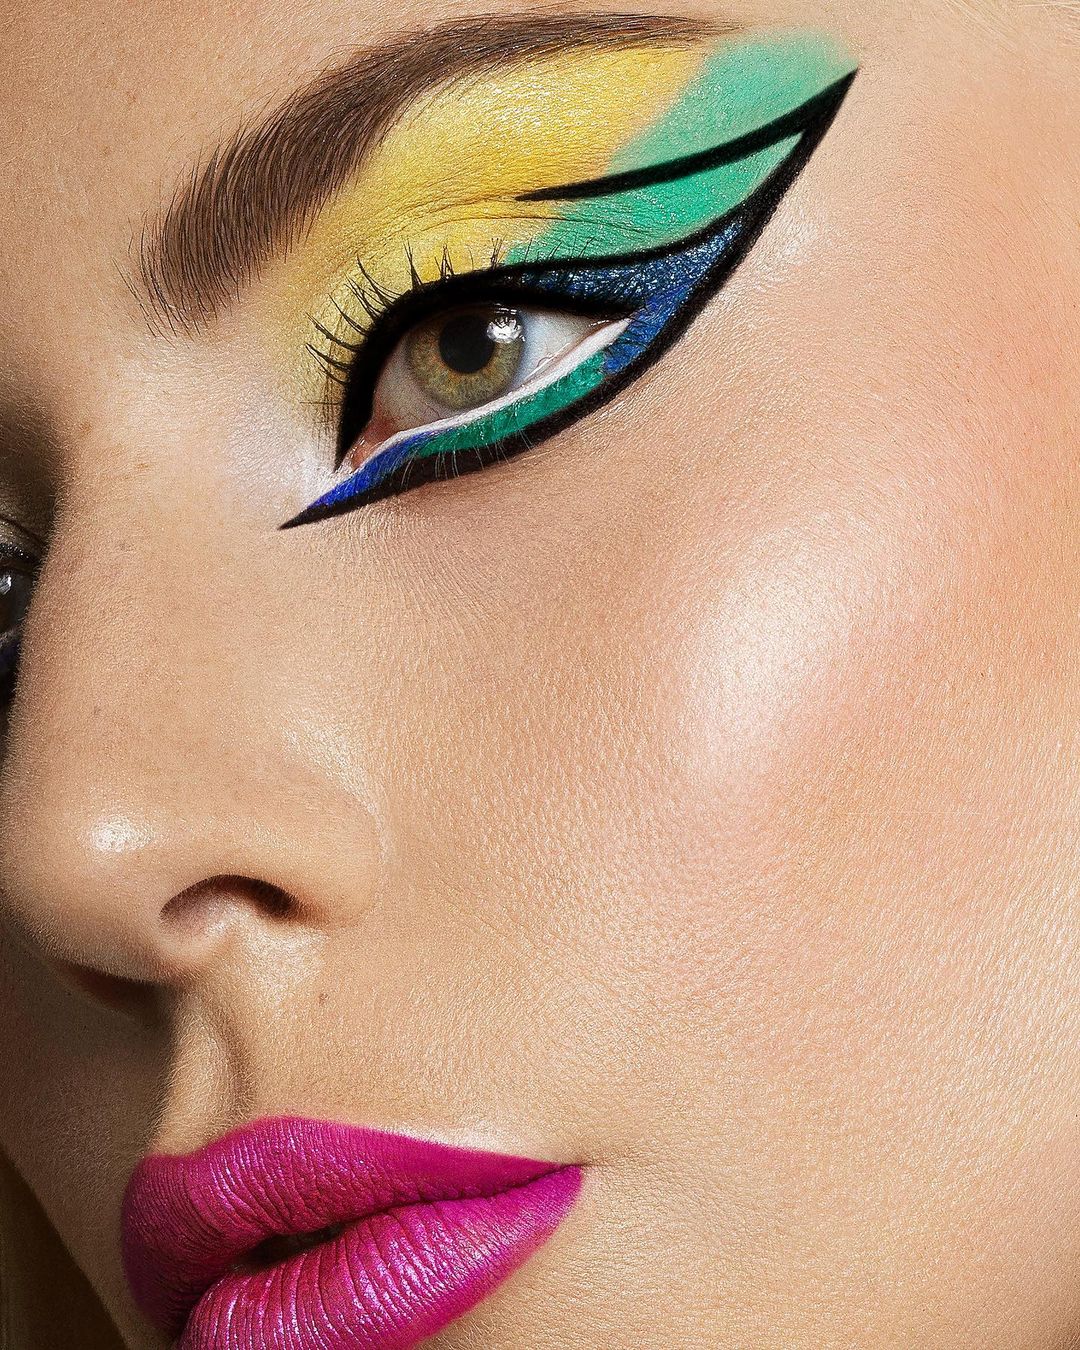 Supercharged clean artistry that embraces performance and vibrant colors. The future of clean makeup is coming June 9 ???? @sephora @hauslabs 
 
Photography: @domenvandevelde
Makeup: @sarahtannomakeup